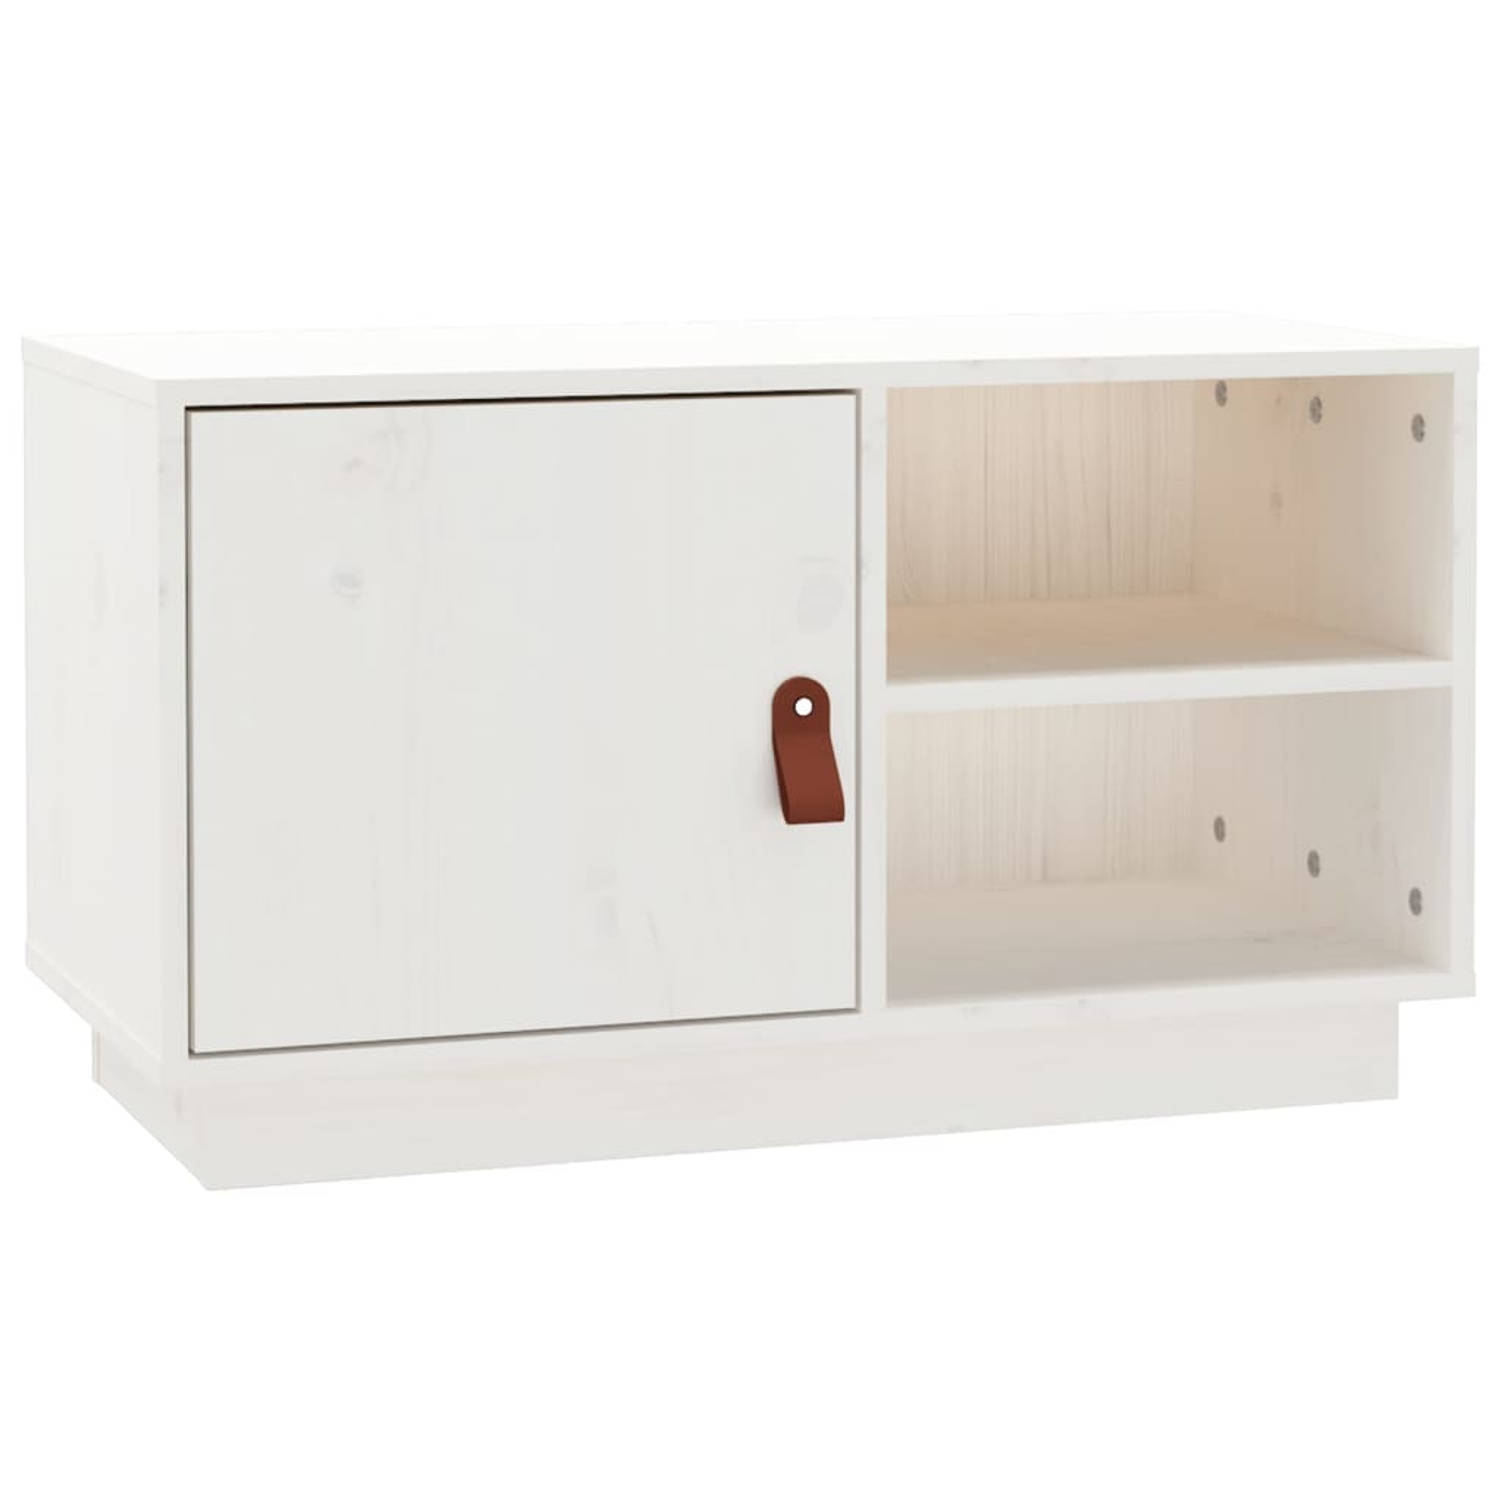 The Living Store Televisiemeubel - Serie tv-kast - Massief grenenhout - 70x34x40 cm - Wit